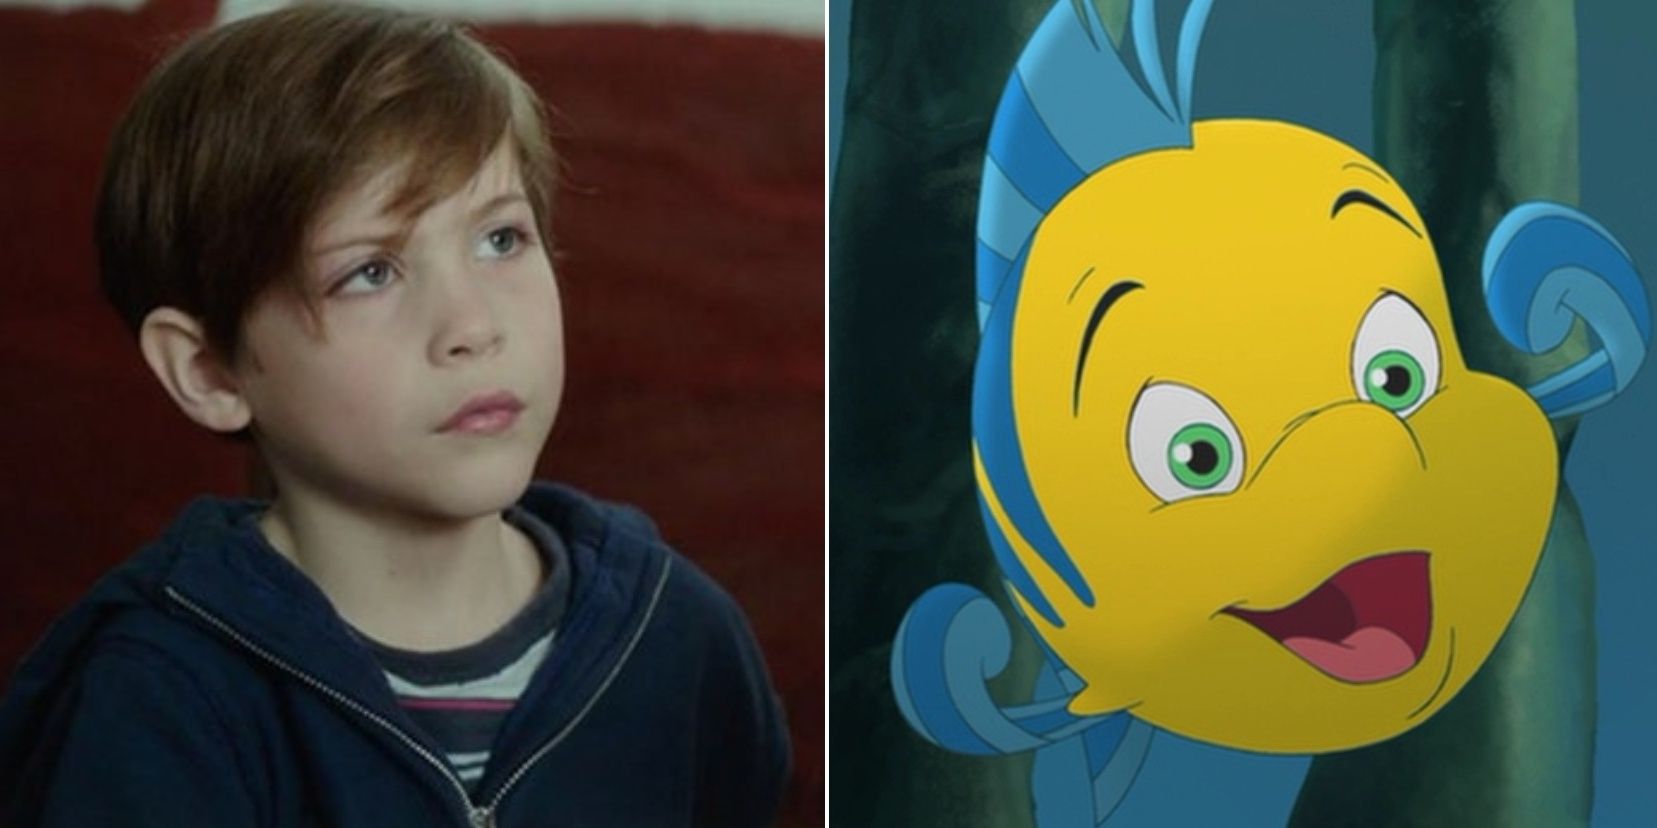 The Little Mermaid The Live Action Cast & Their Animated Counterparts